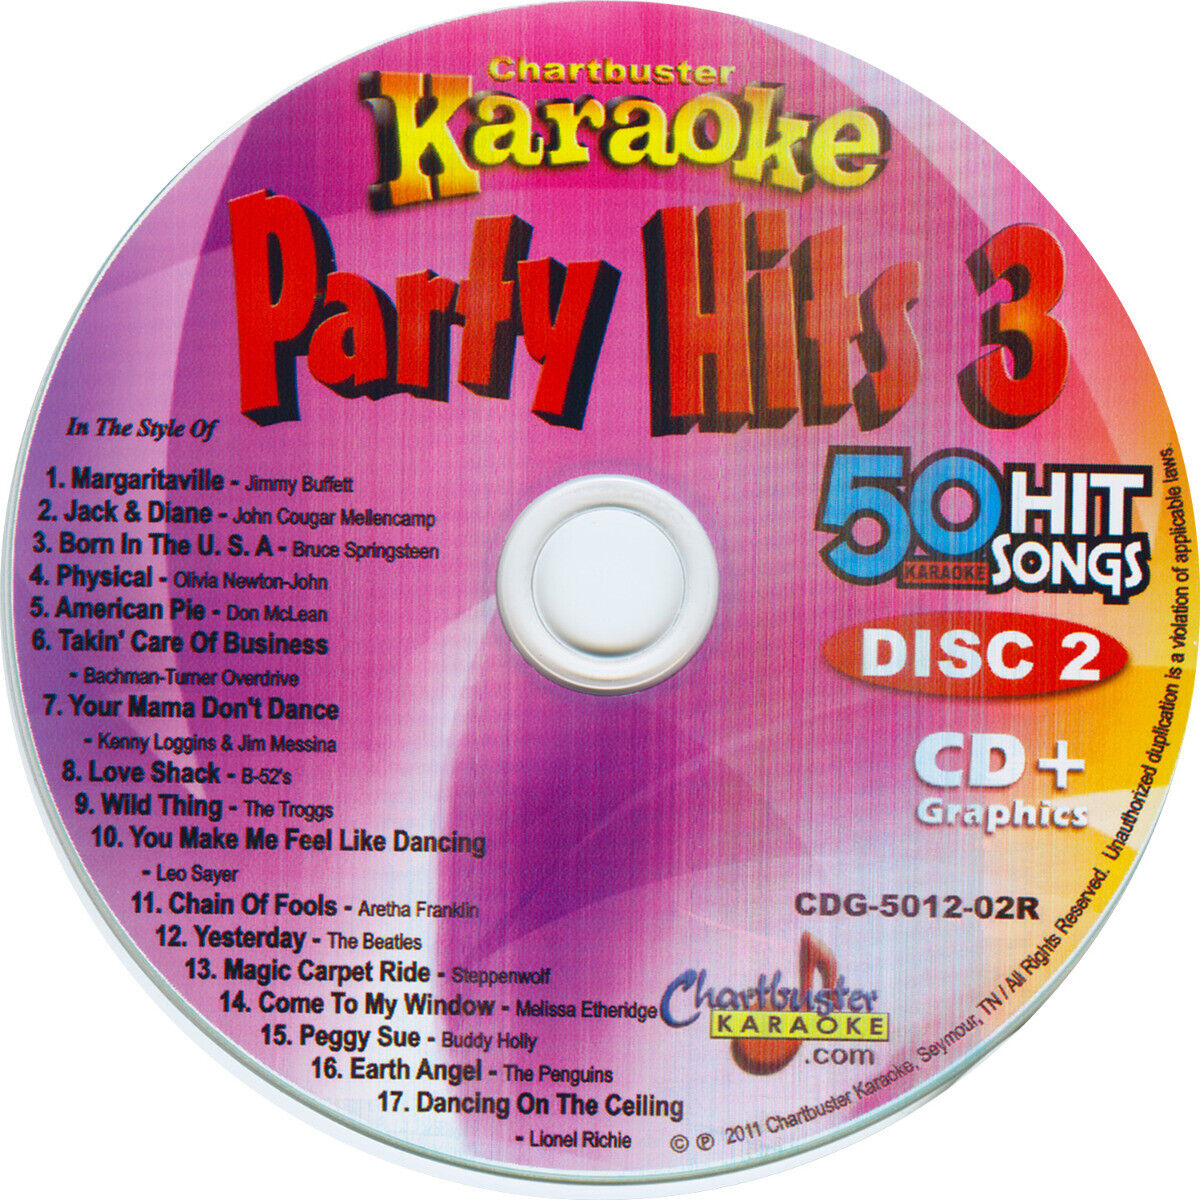 Party Hits Vol-3 Karaoke Charbuster Cd+g 5012 Disc-2 The Beatles+ New In Sleeves